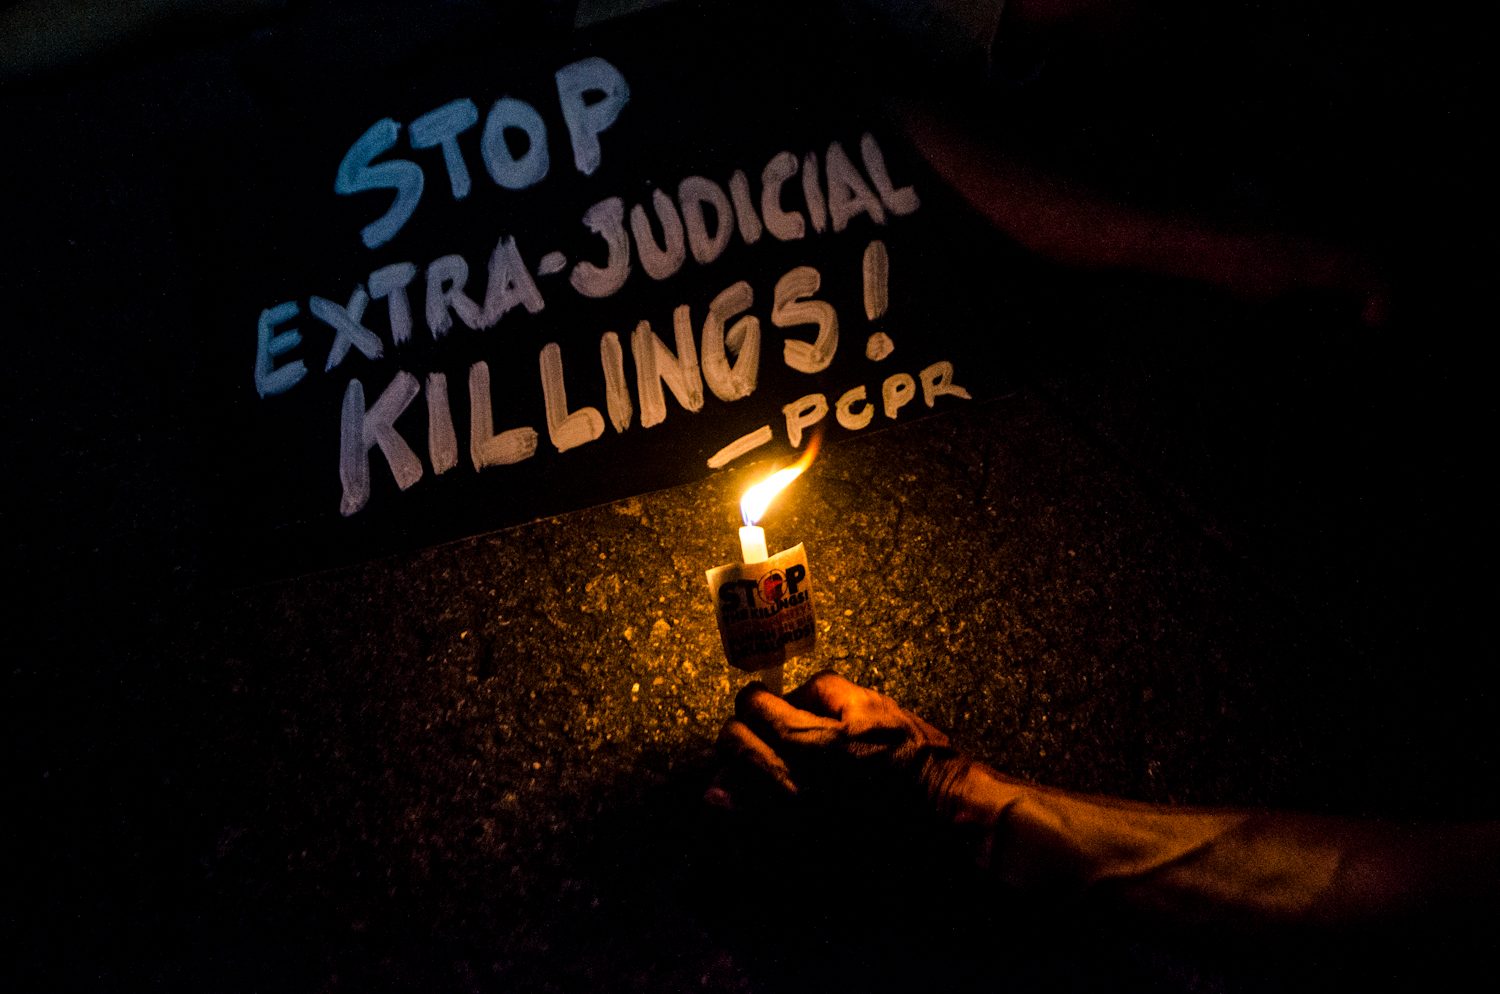 House Committee Drops Use Of Extrajudicial Killings In Probes Reports